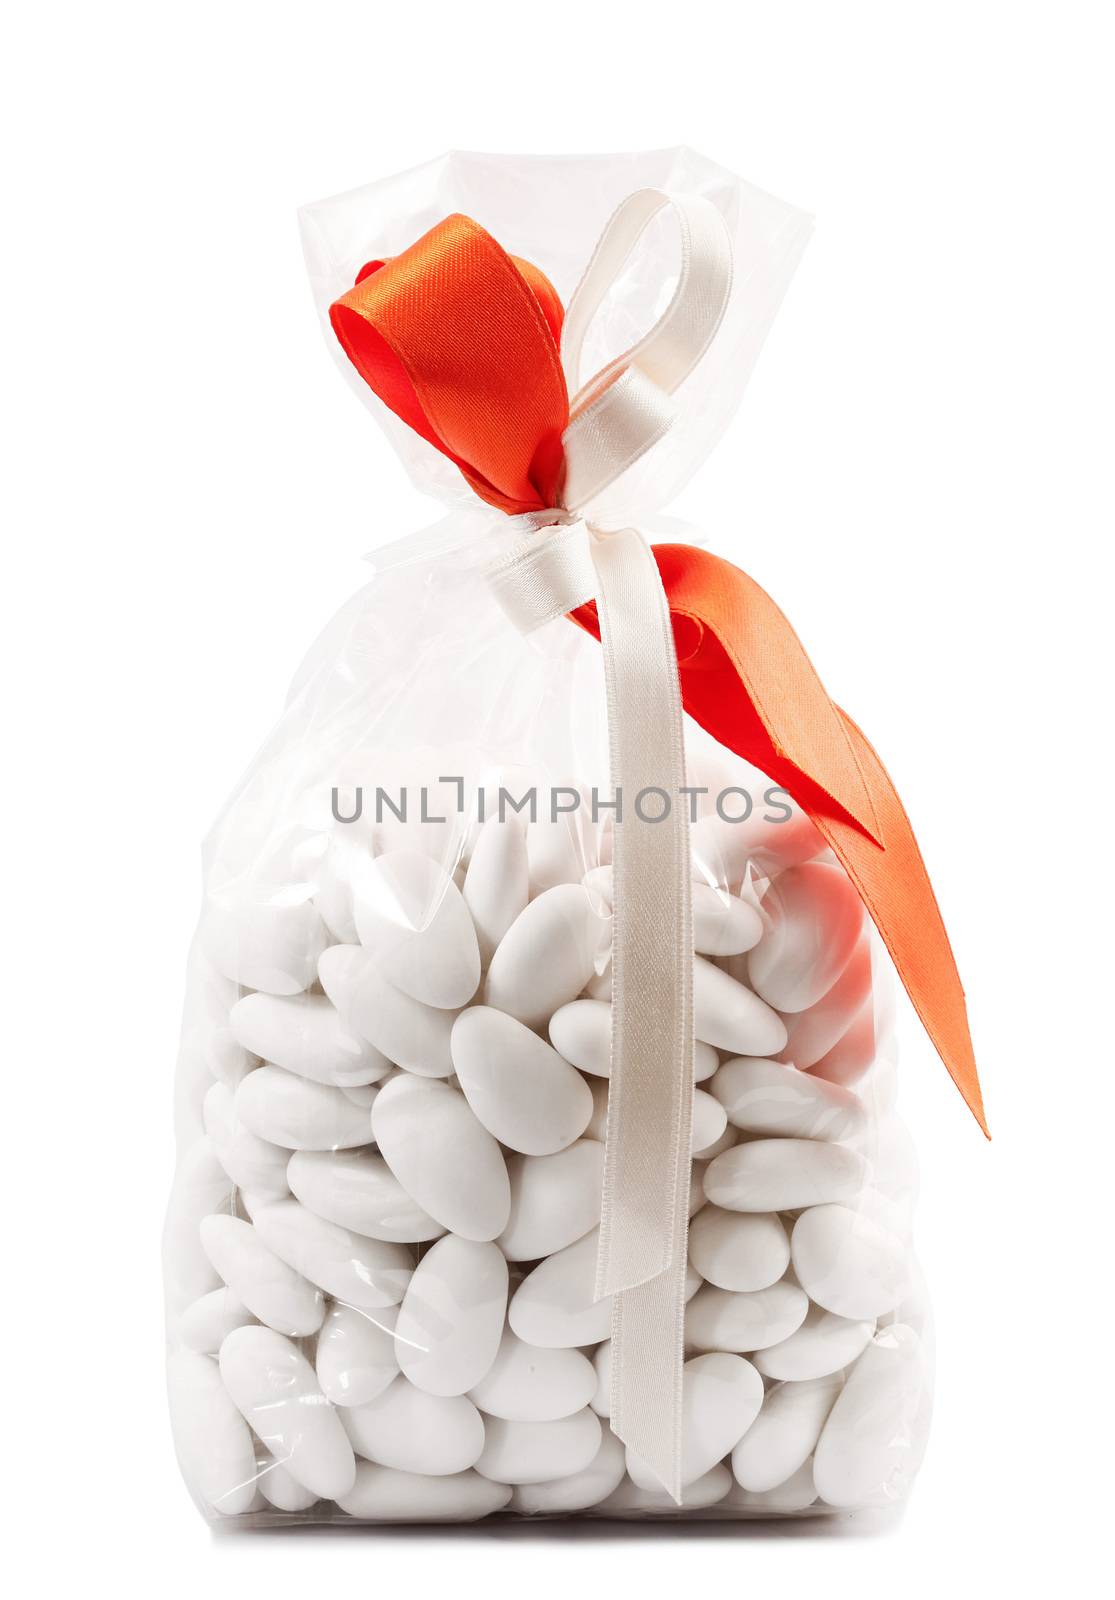 bag of comfits on white background